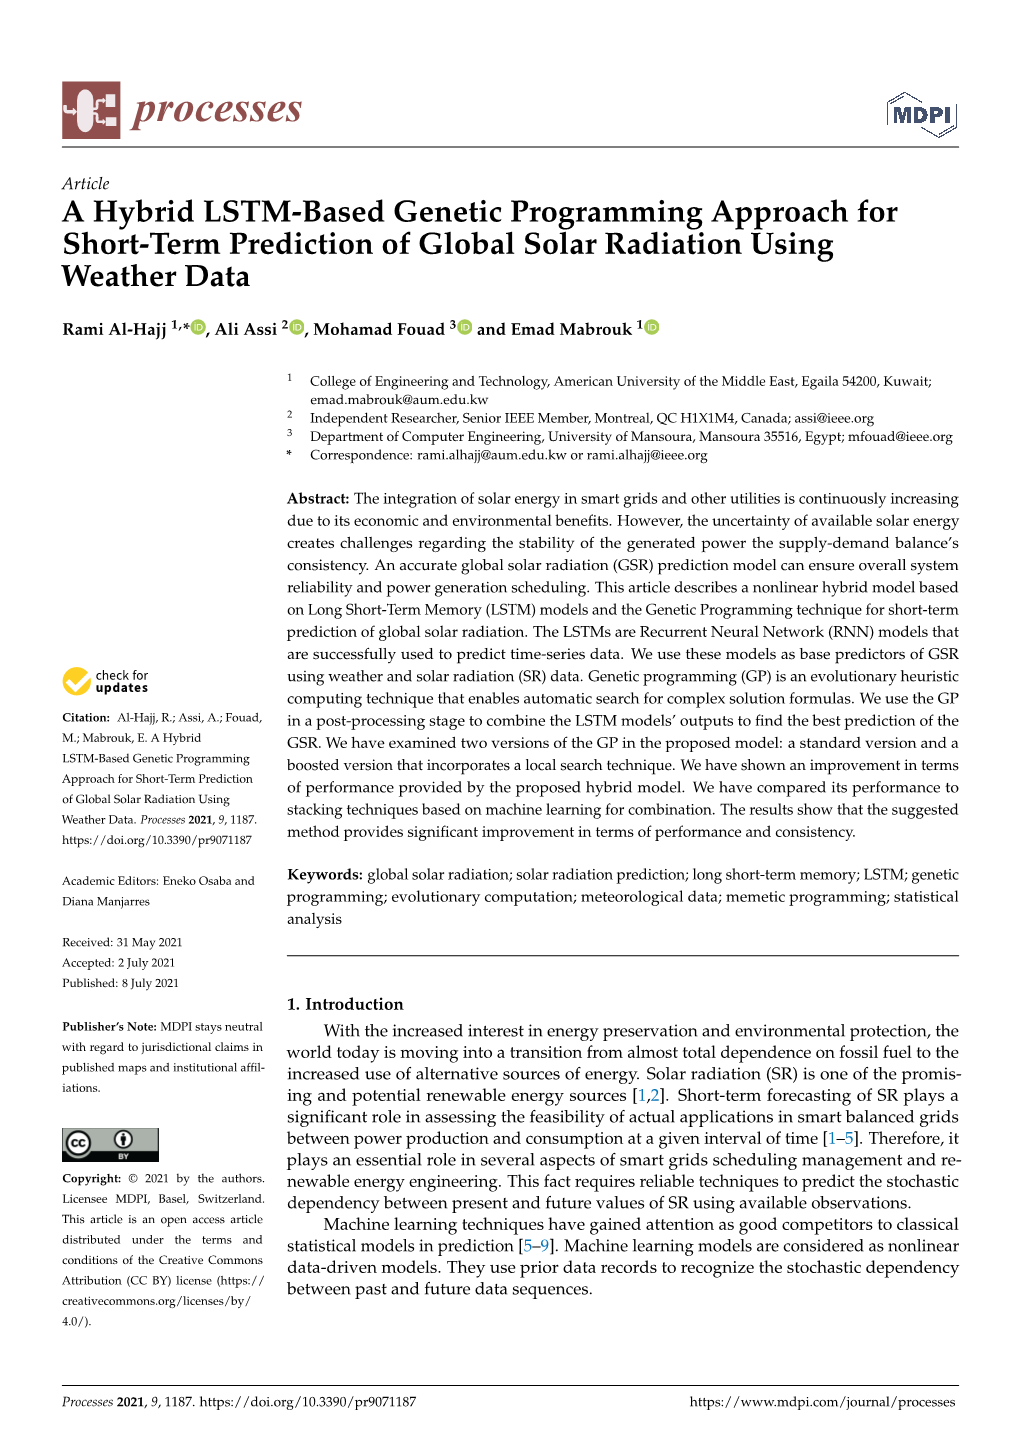 A Hybrid LSTM-Based Genetic Programming Approach for Short-Term Prediction of Global Solar Radiation Using Weather Data